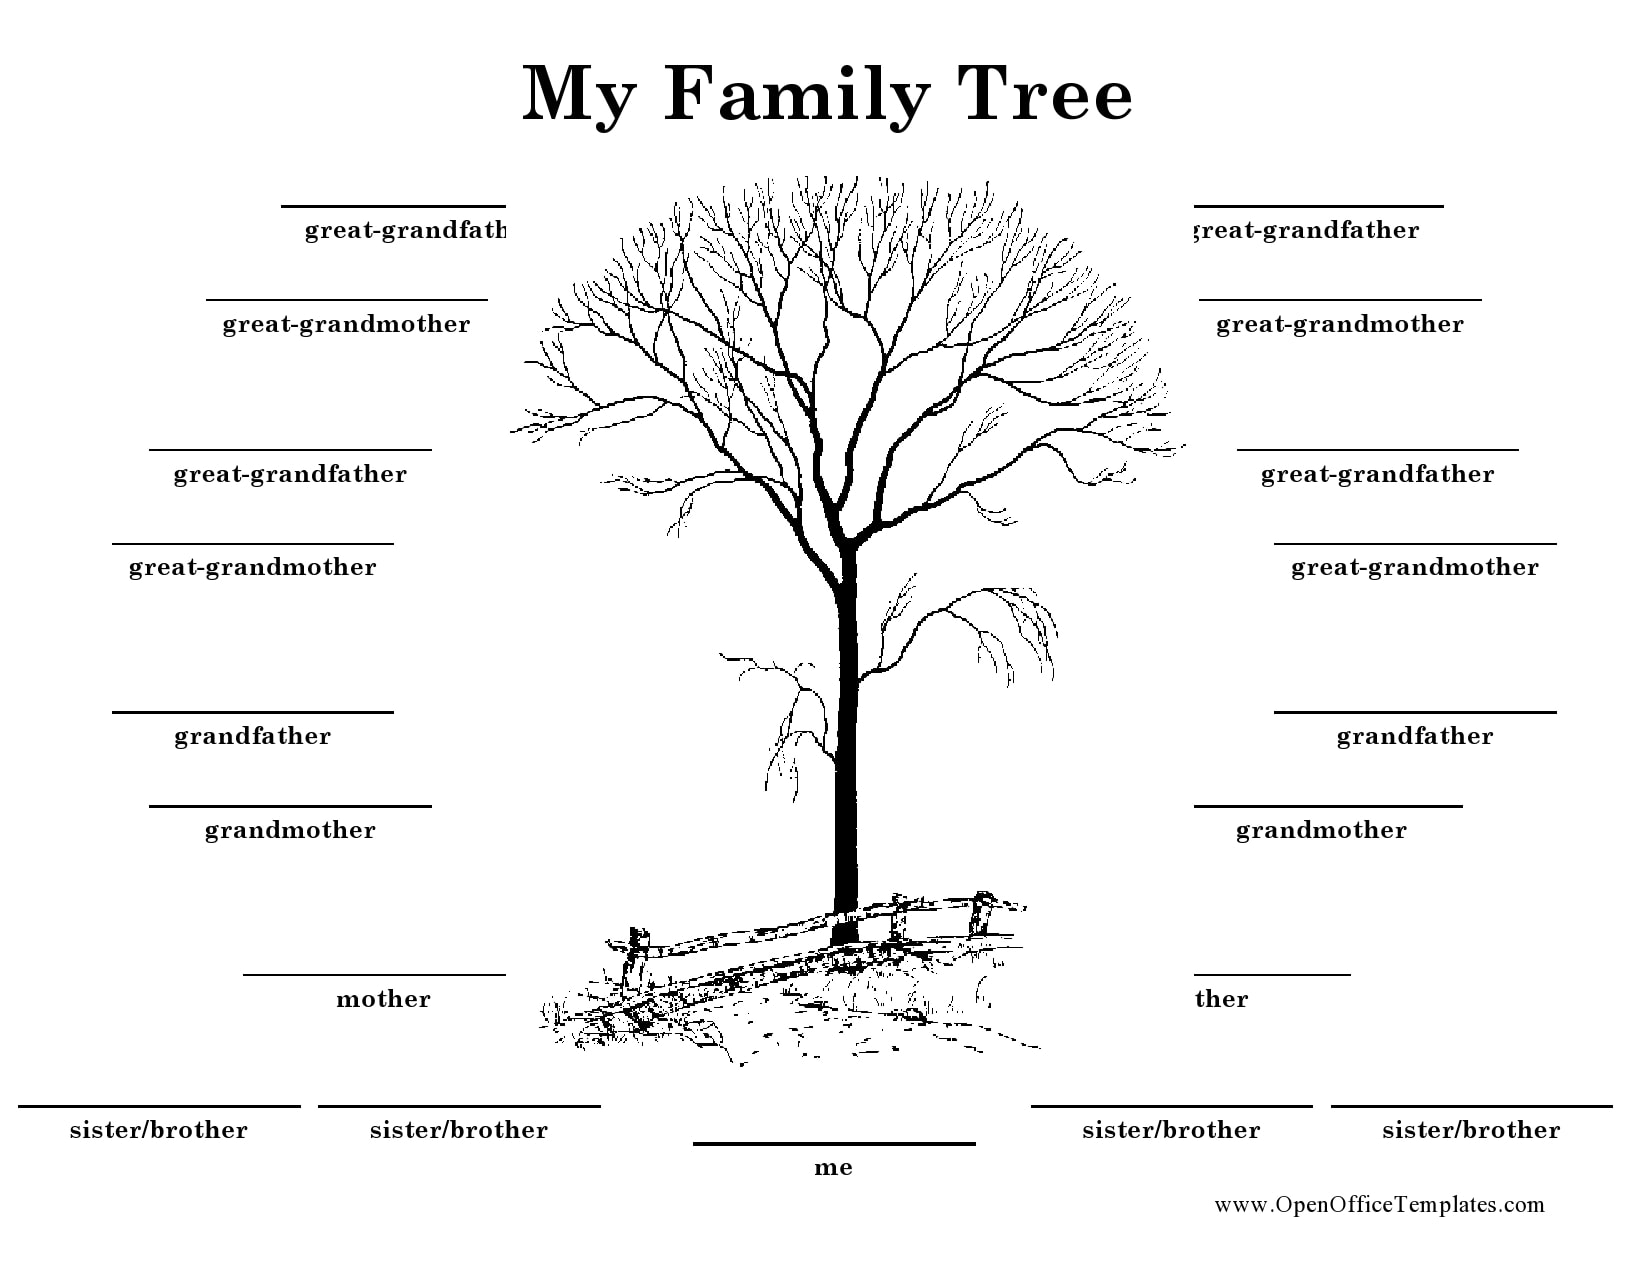 30-editable-family-tree-templates-100-free-templatearchive